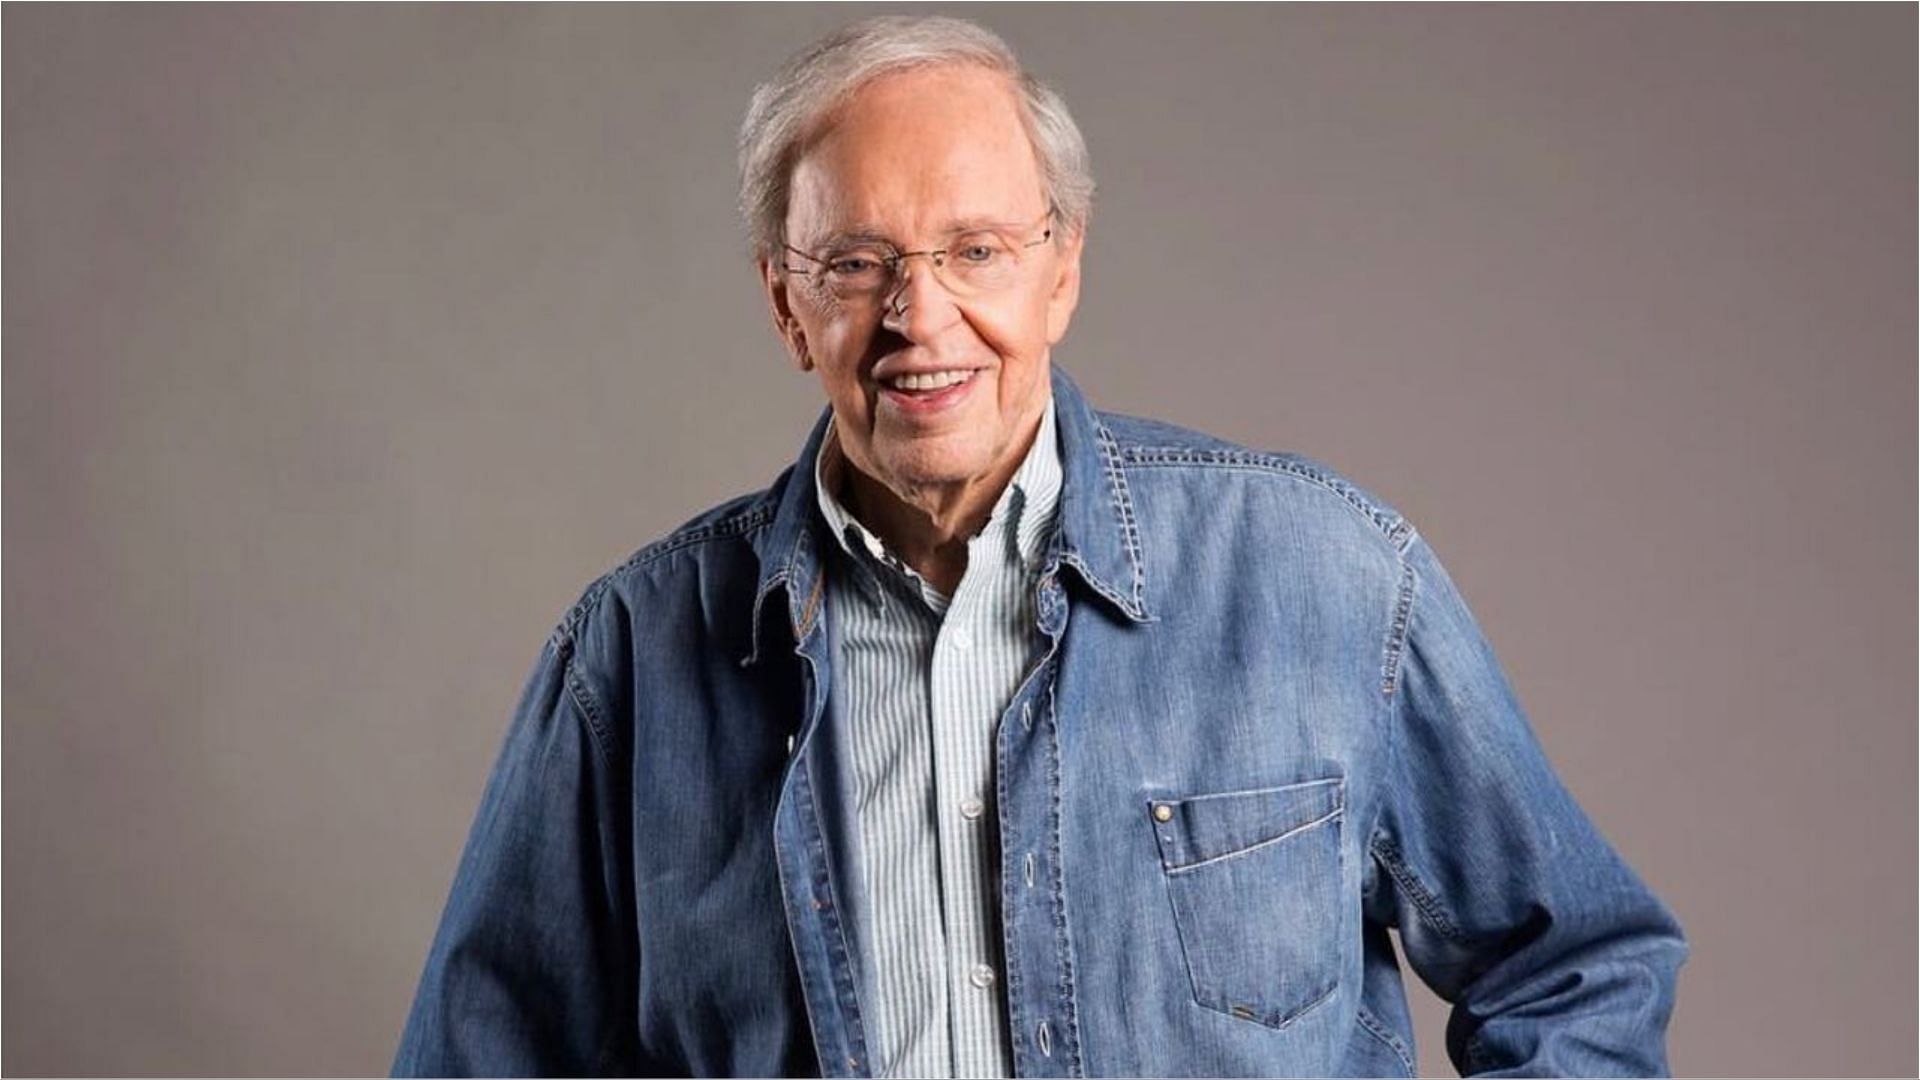 Charles Stanley recently died at the age of 90 (Image via Kirk Cameron/Getty Images)